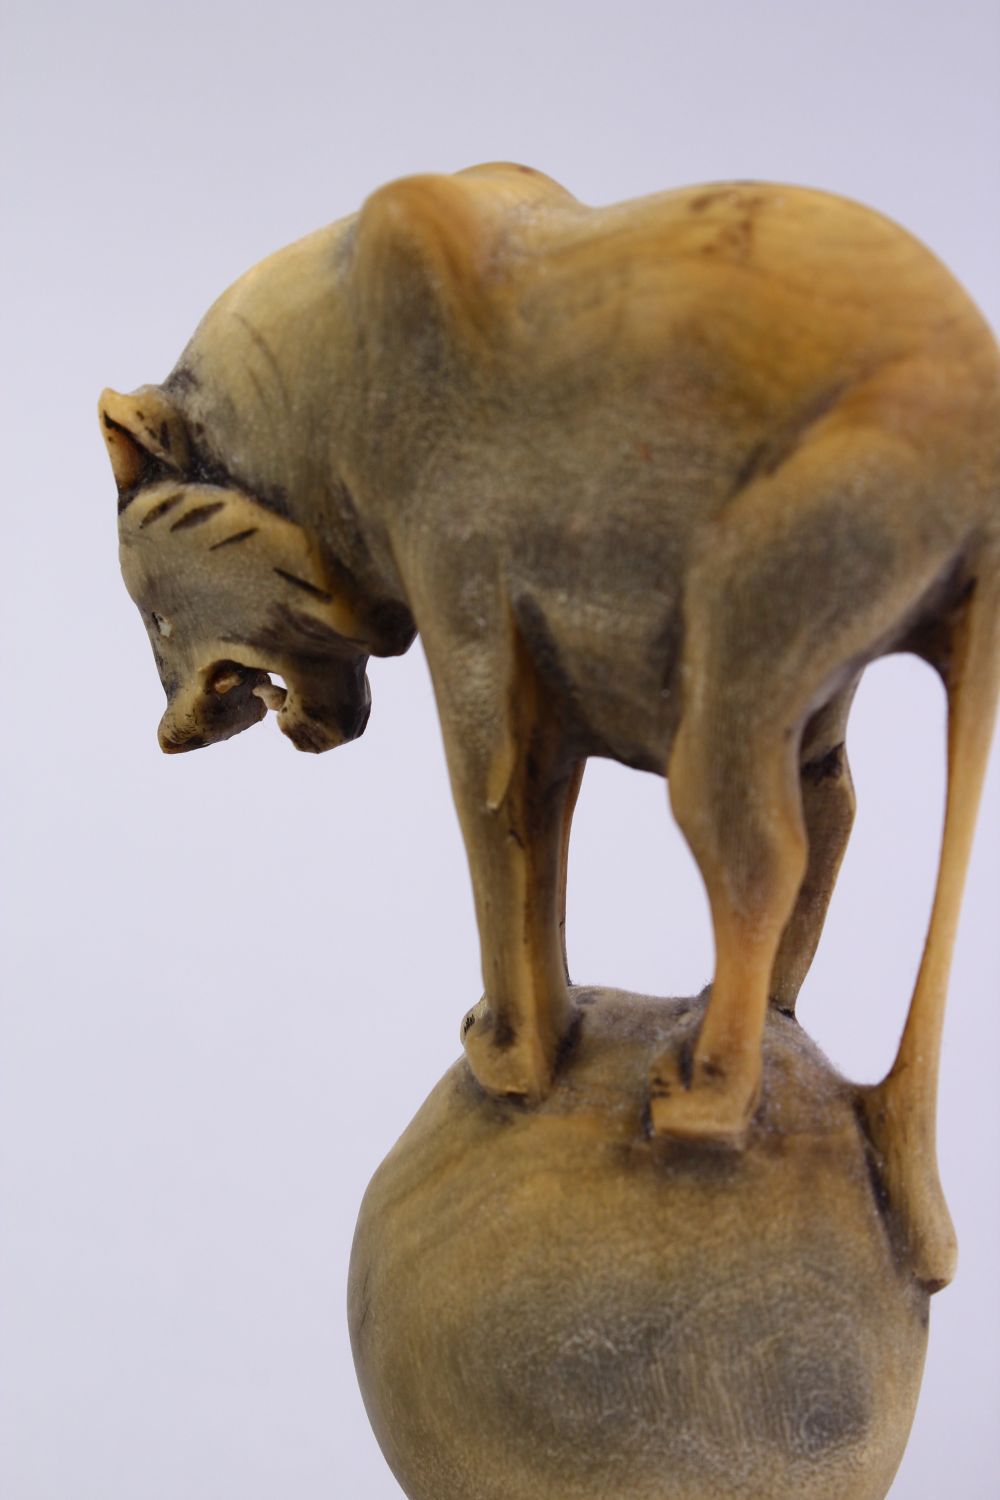 A PAIR OF CARVED HORN WOLF FIGURES, stood on balls mounted to wooden bases, 15.5cm. - Image 5 of 6